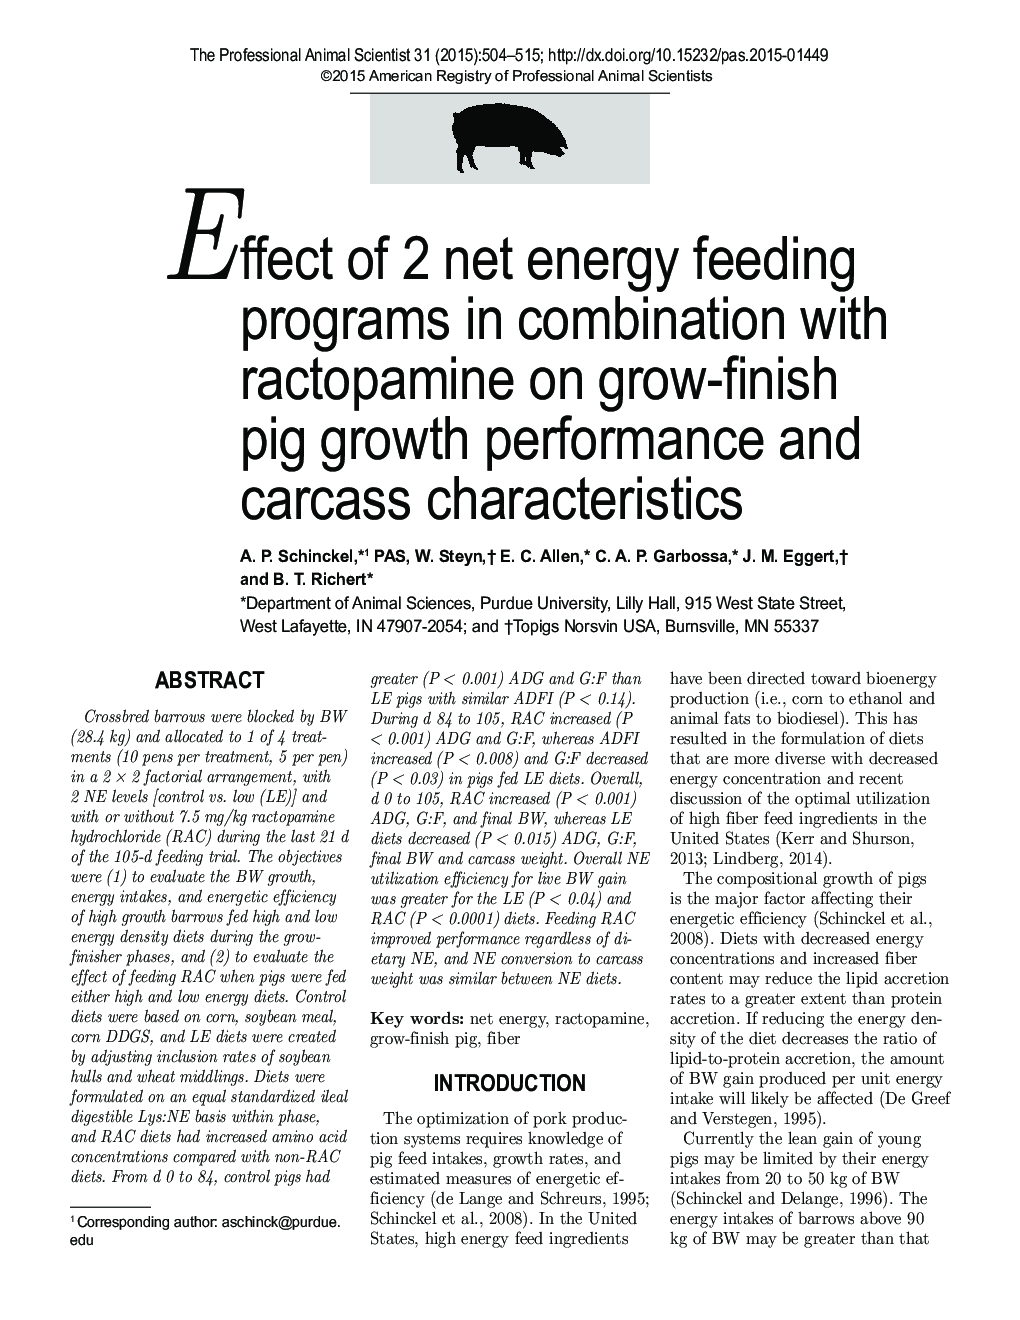 Effect of 2 net energy feeding programs in combination with ractopamine on grow-finish pig growth performance and carcass characteristics